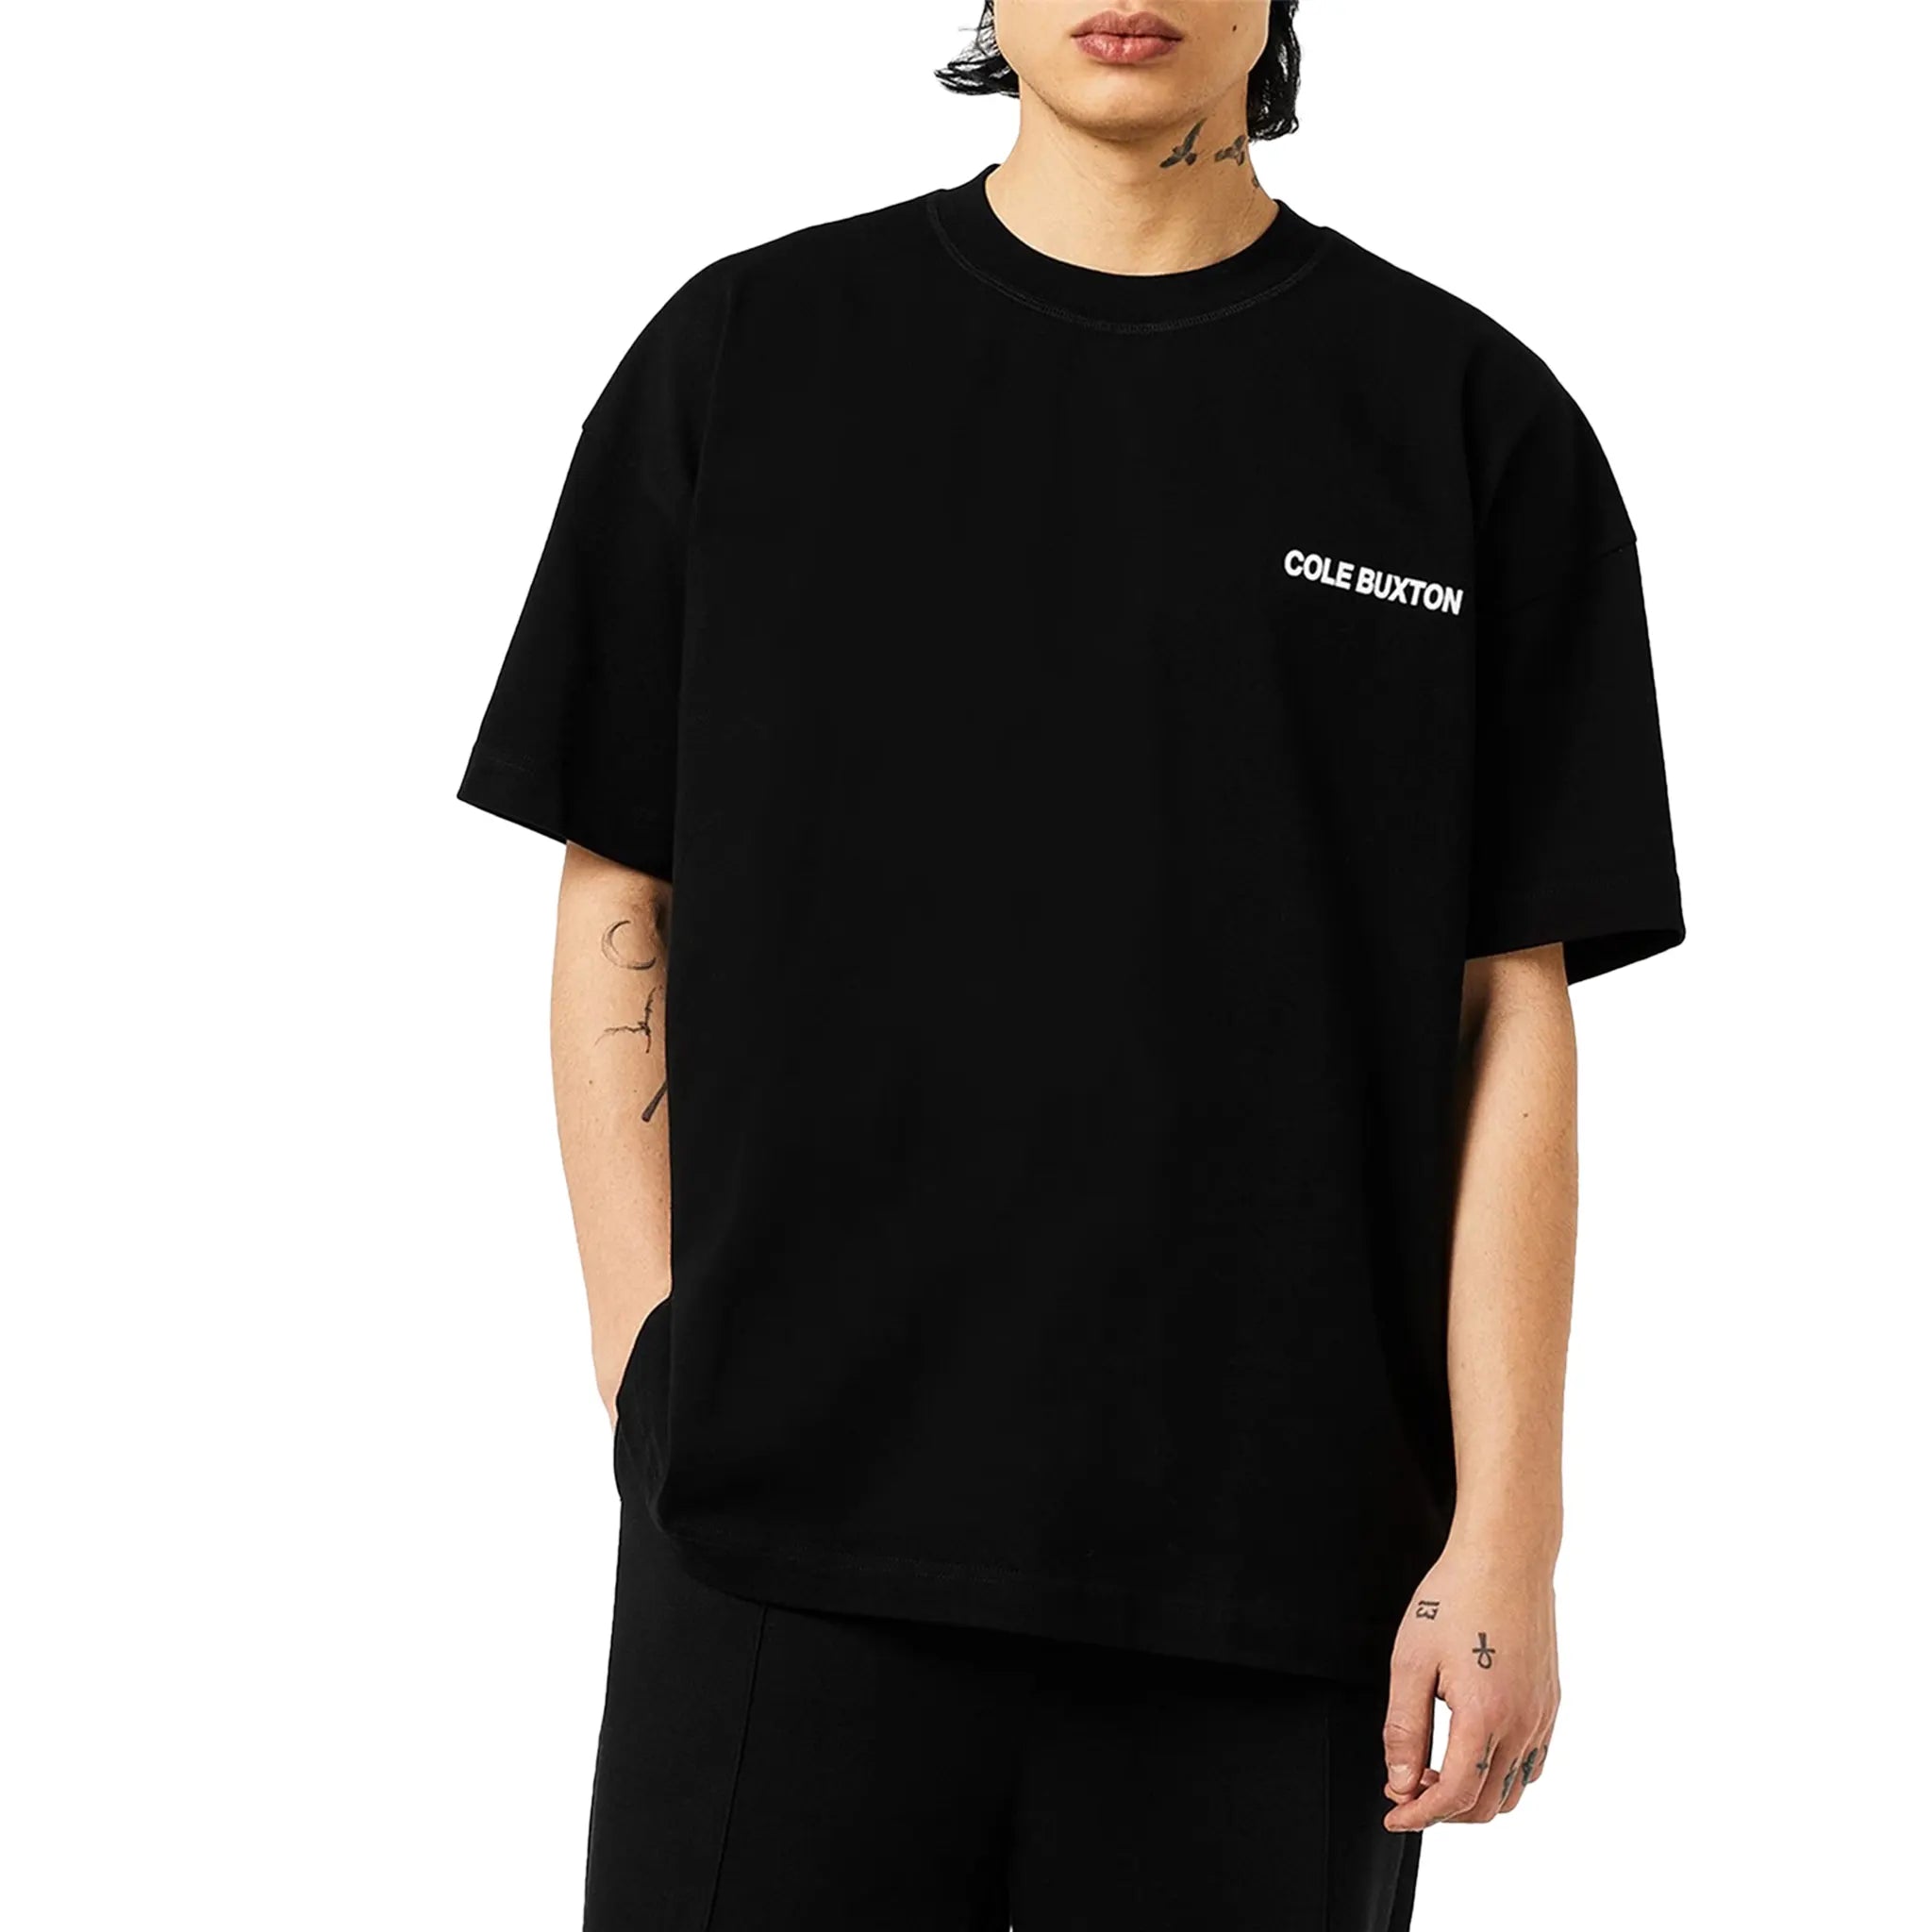 Model Front view of Cole Buxton CB Sportswear Black T Shirt aw23cbst001-000